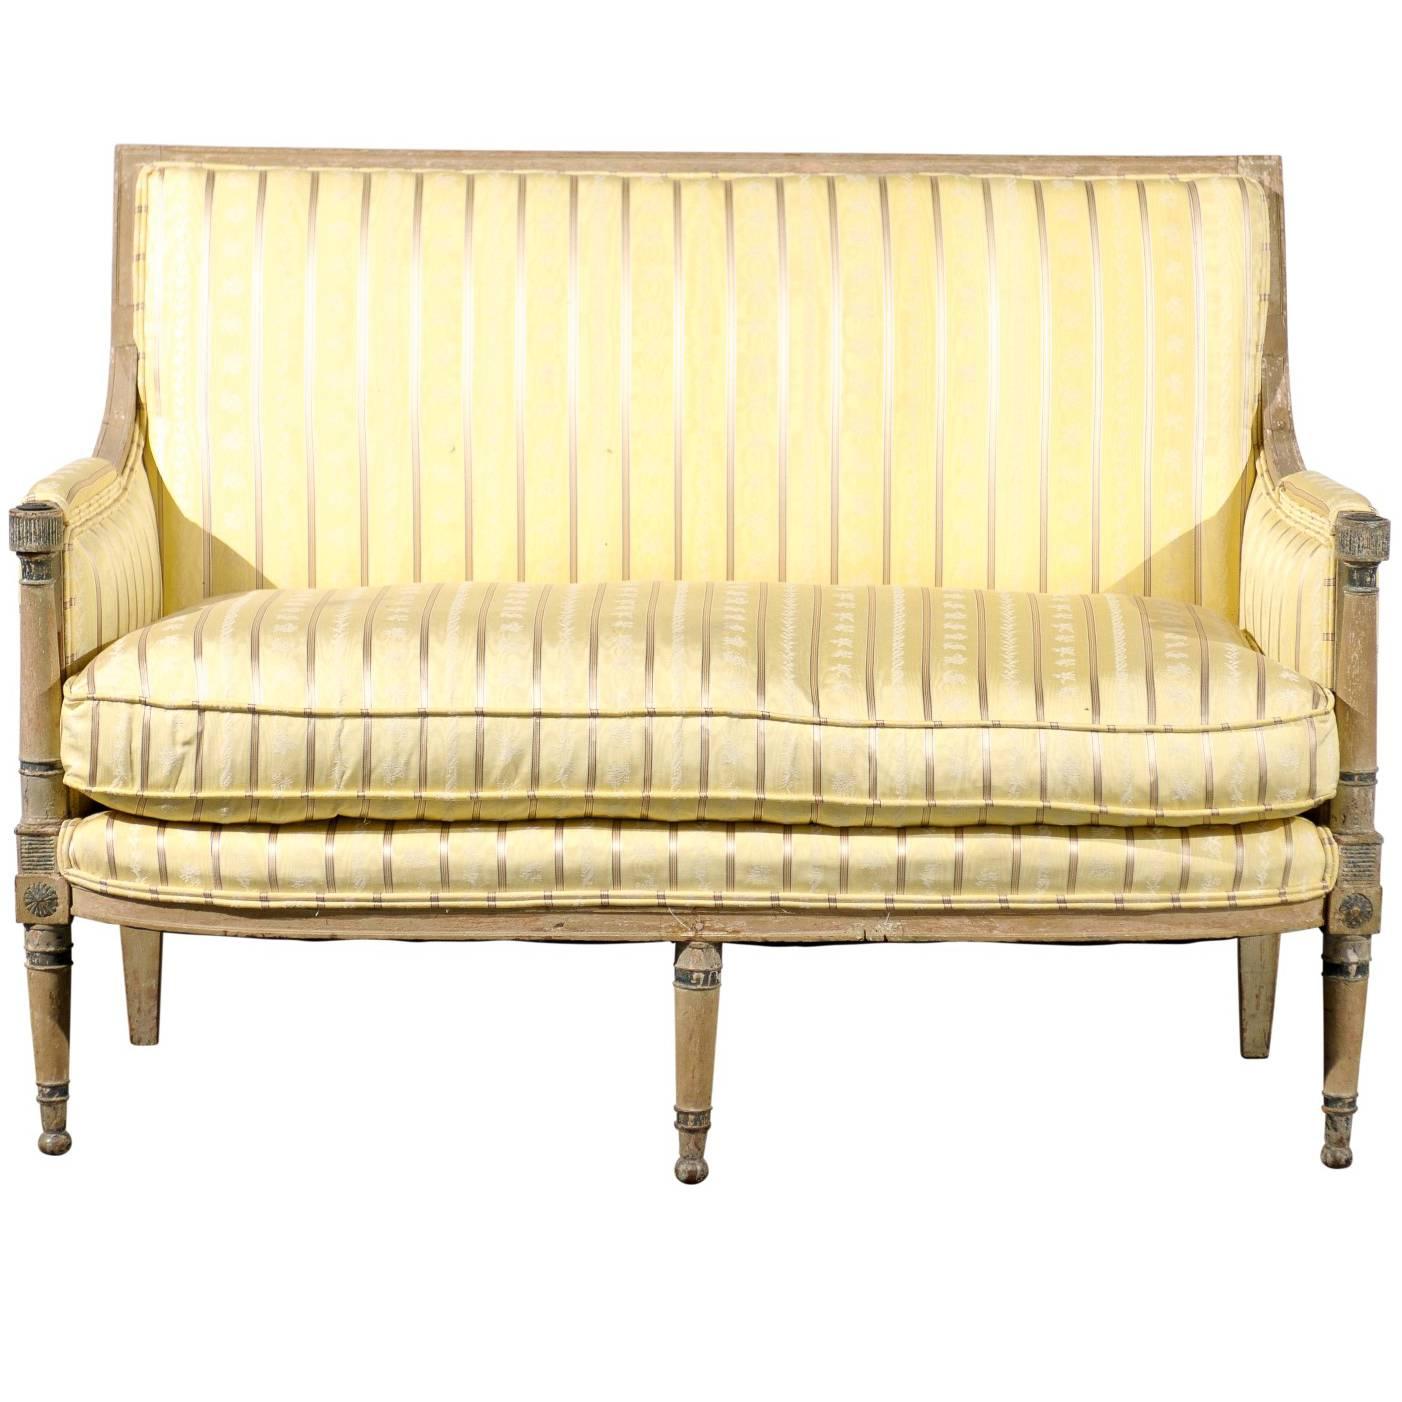 19th Century Painted Directoire Settee